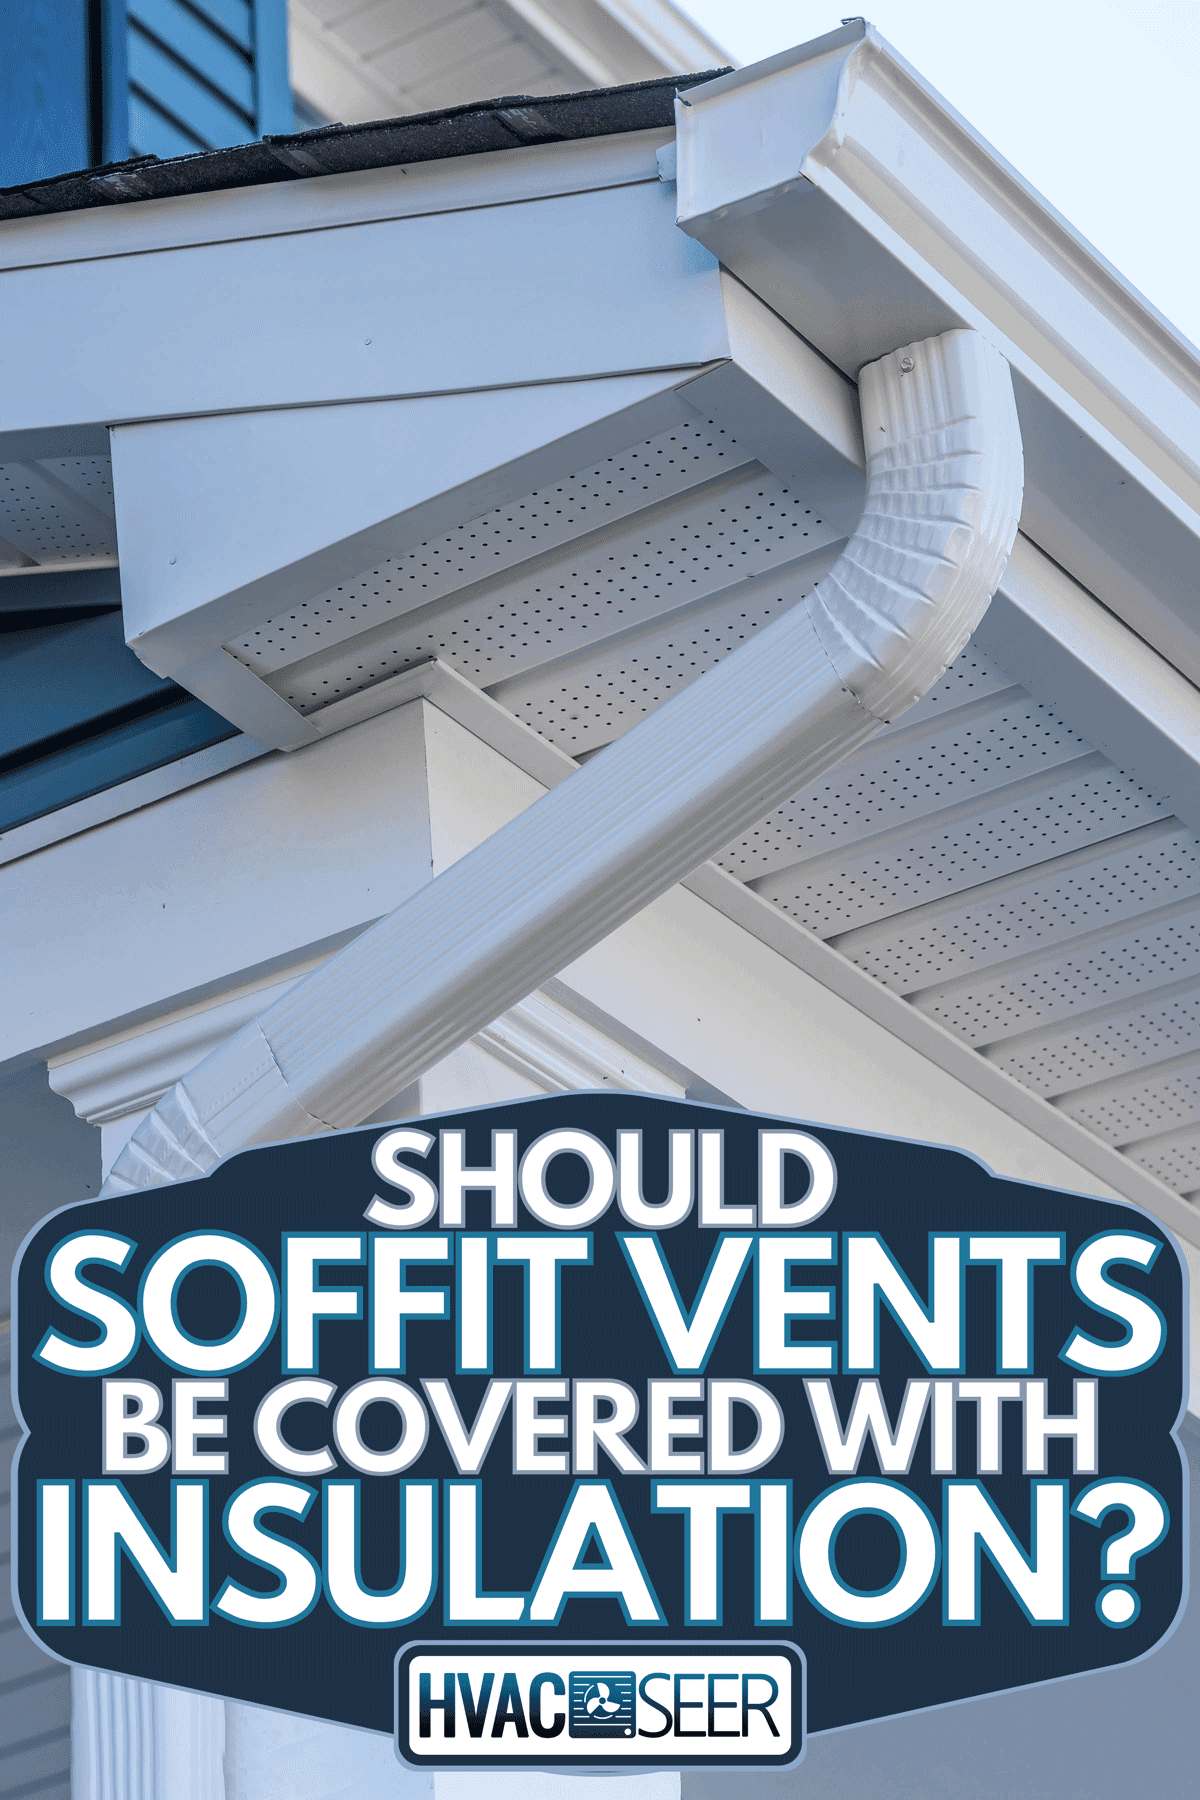 A colonial white gutter guard system, Should Soffit Vents Be Covered With Insulation?